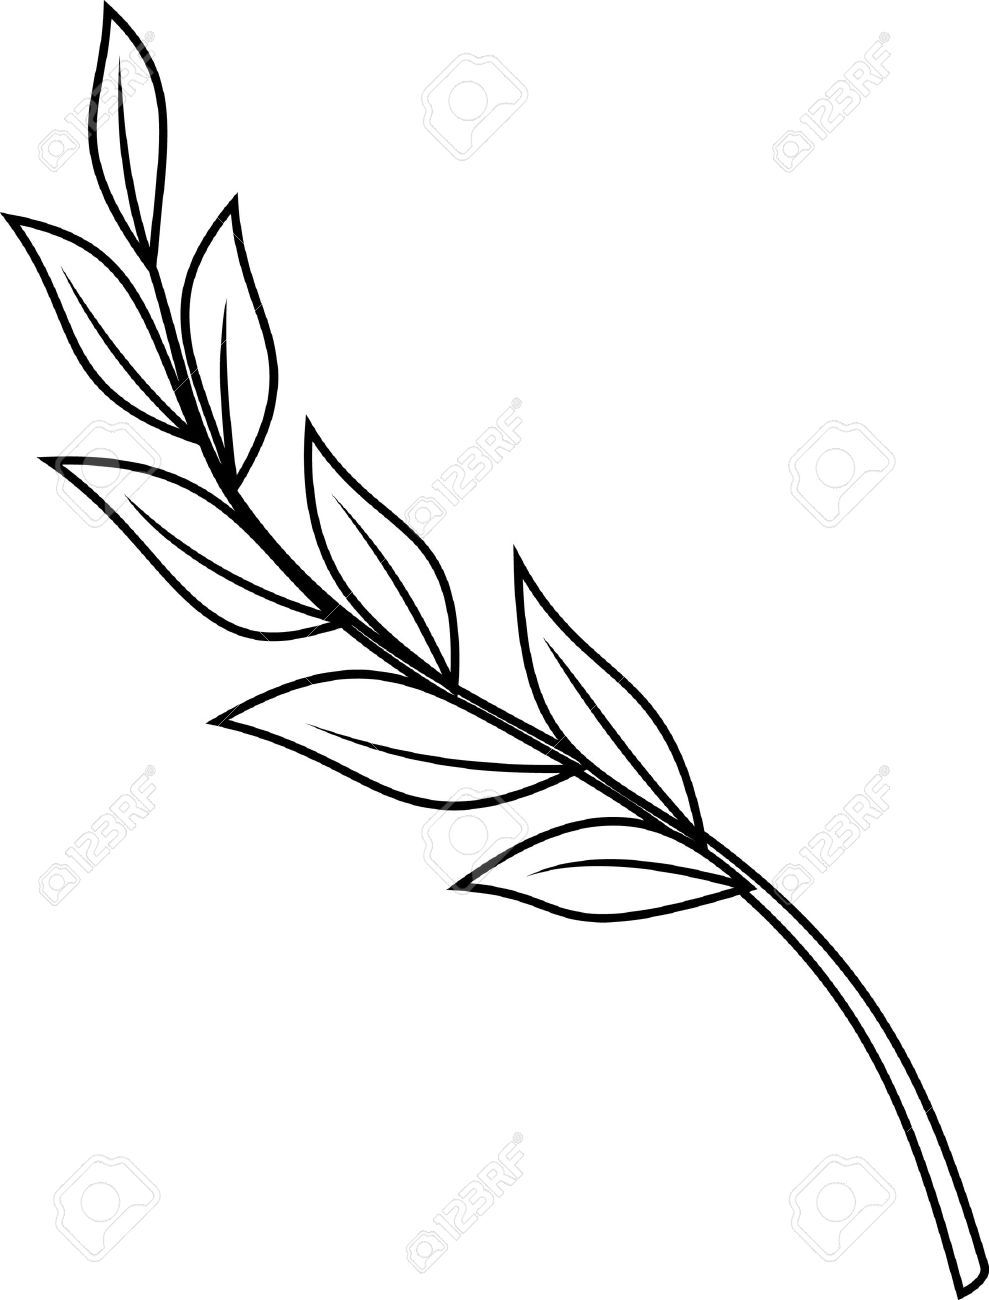 Laurel Branch Stock Vector Illustration And Royalty Free